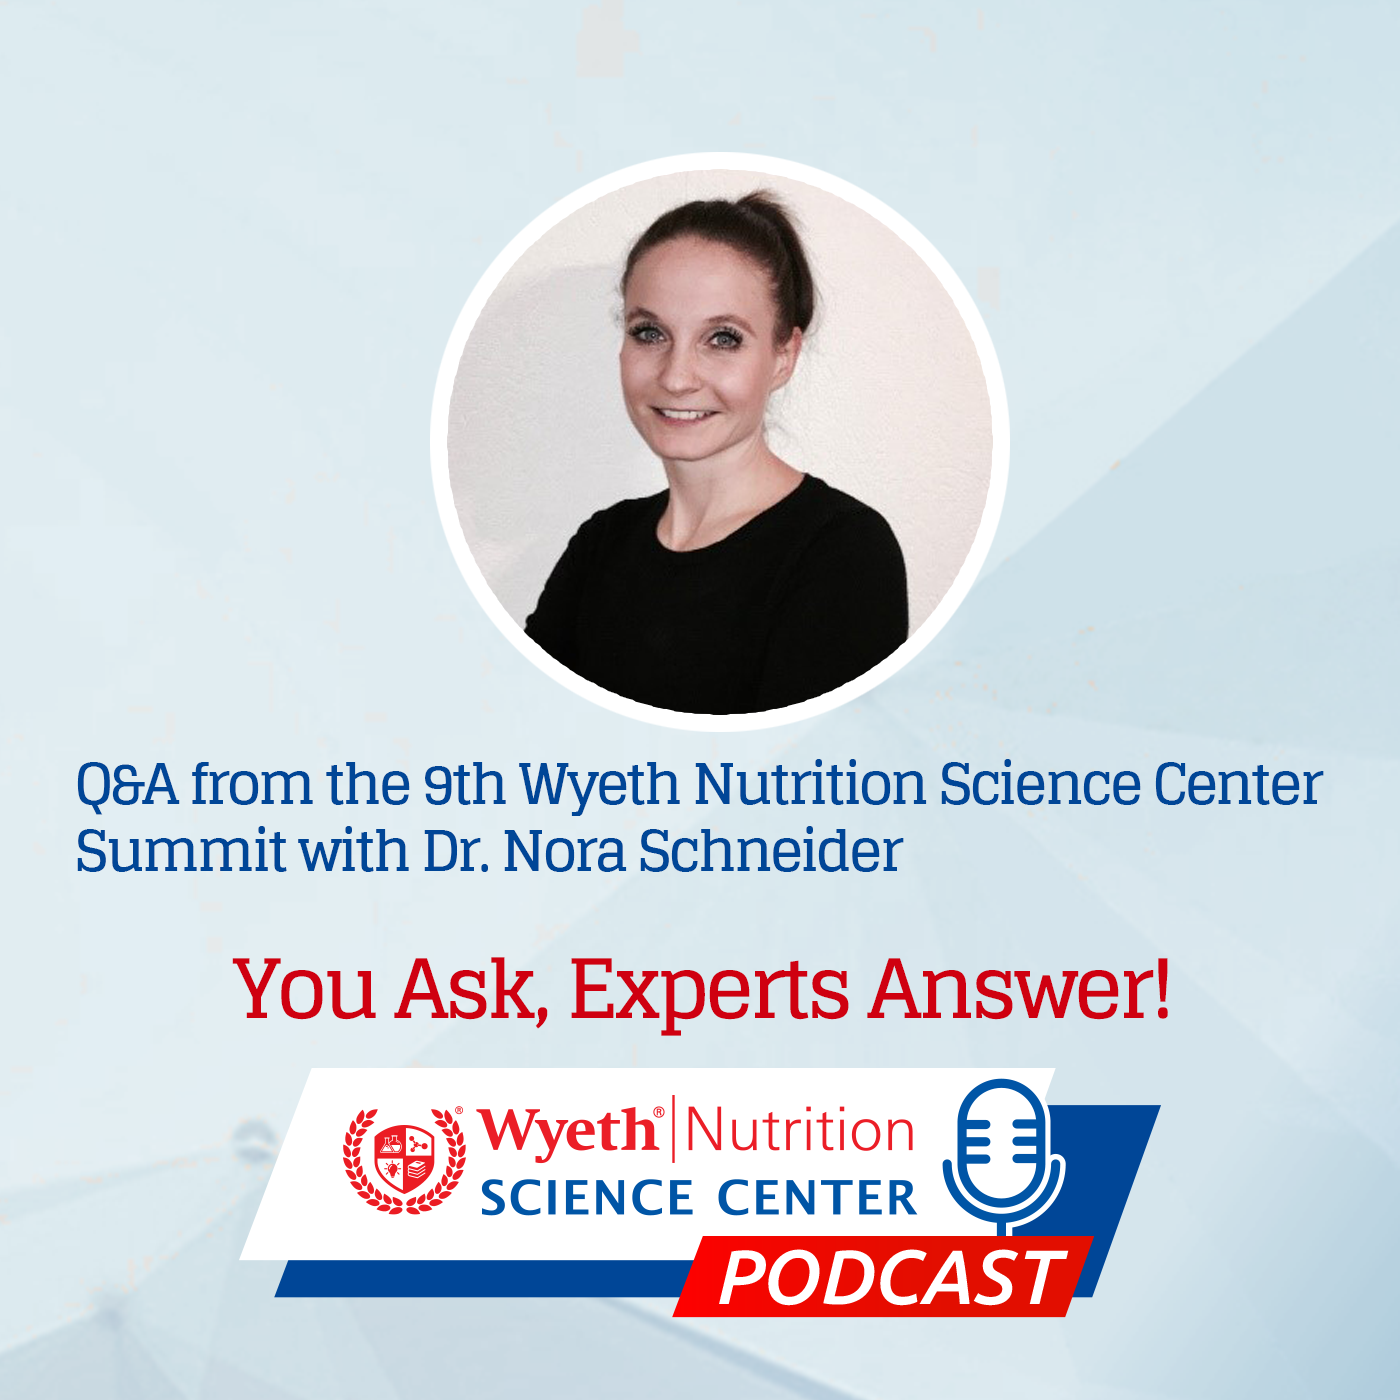 Q&A podcast from the 9th Wyeth Nutrition Science Center Summit with Dr. Nora Schneider